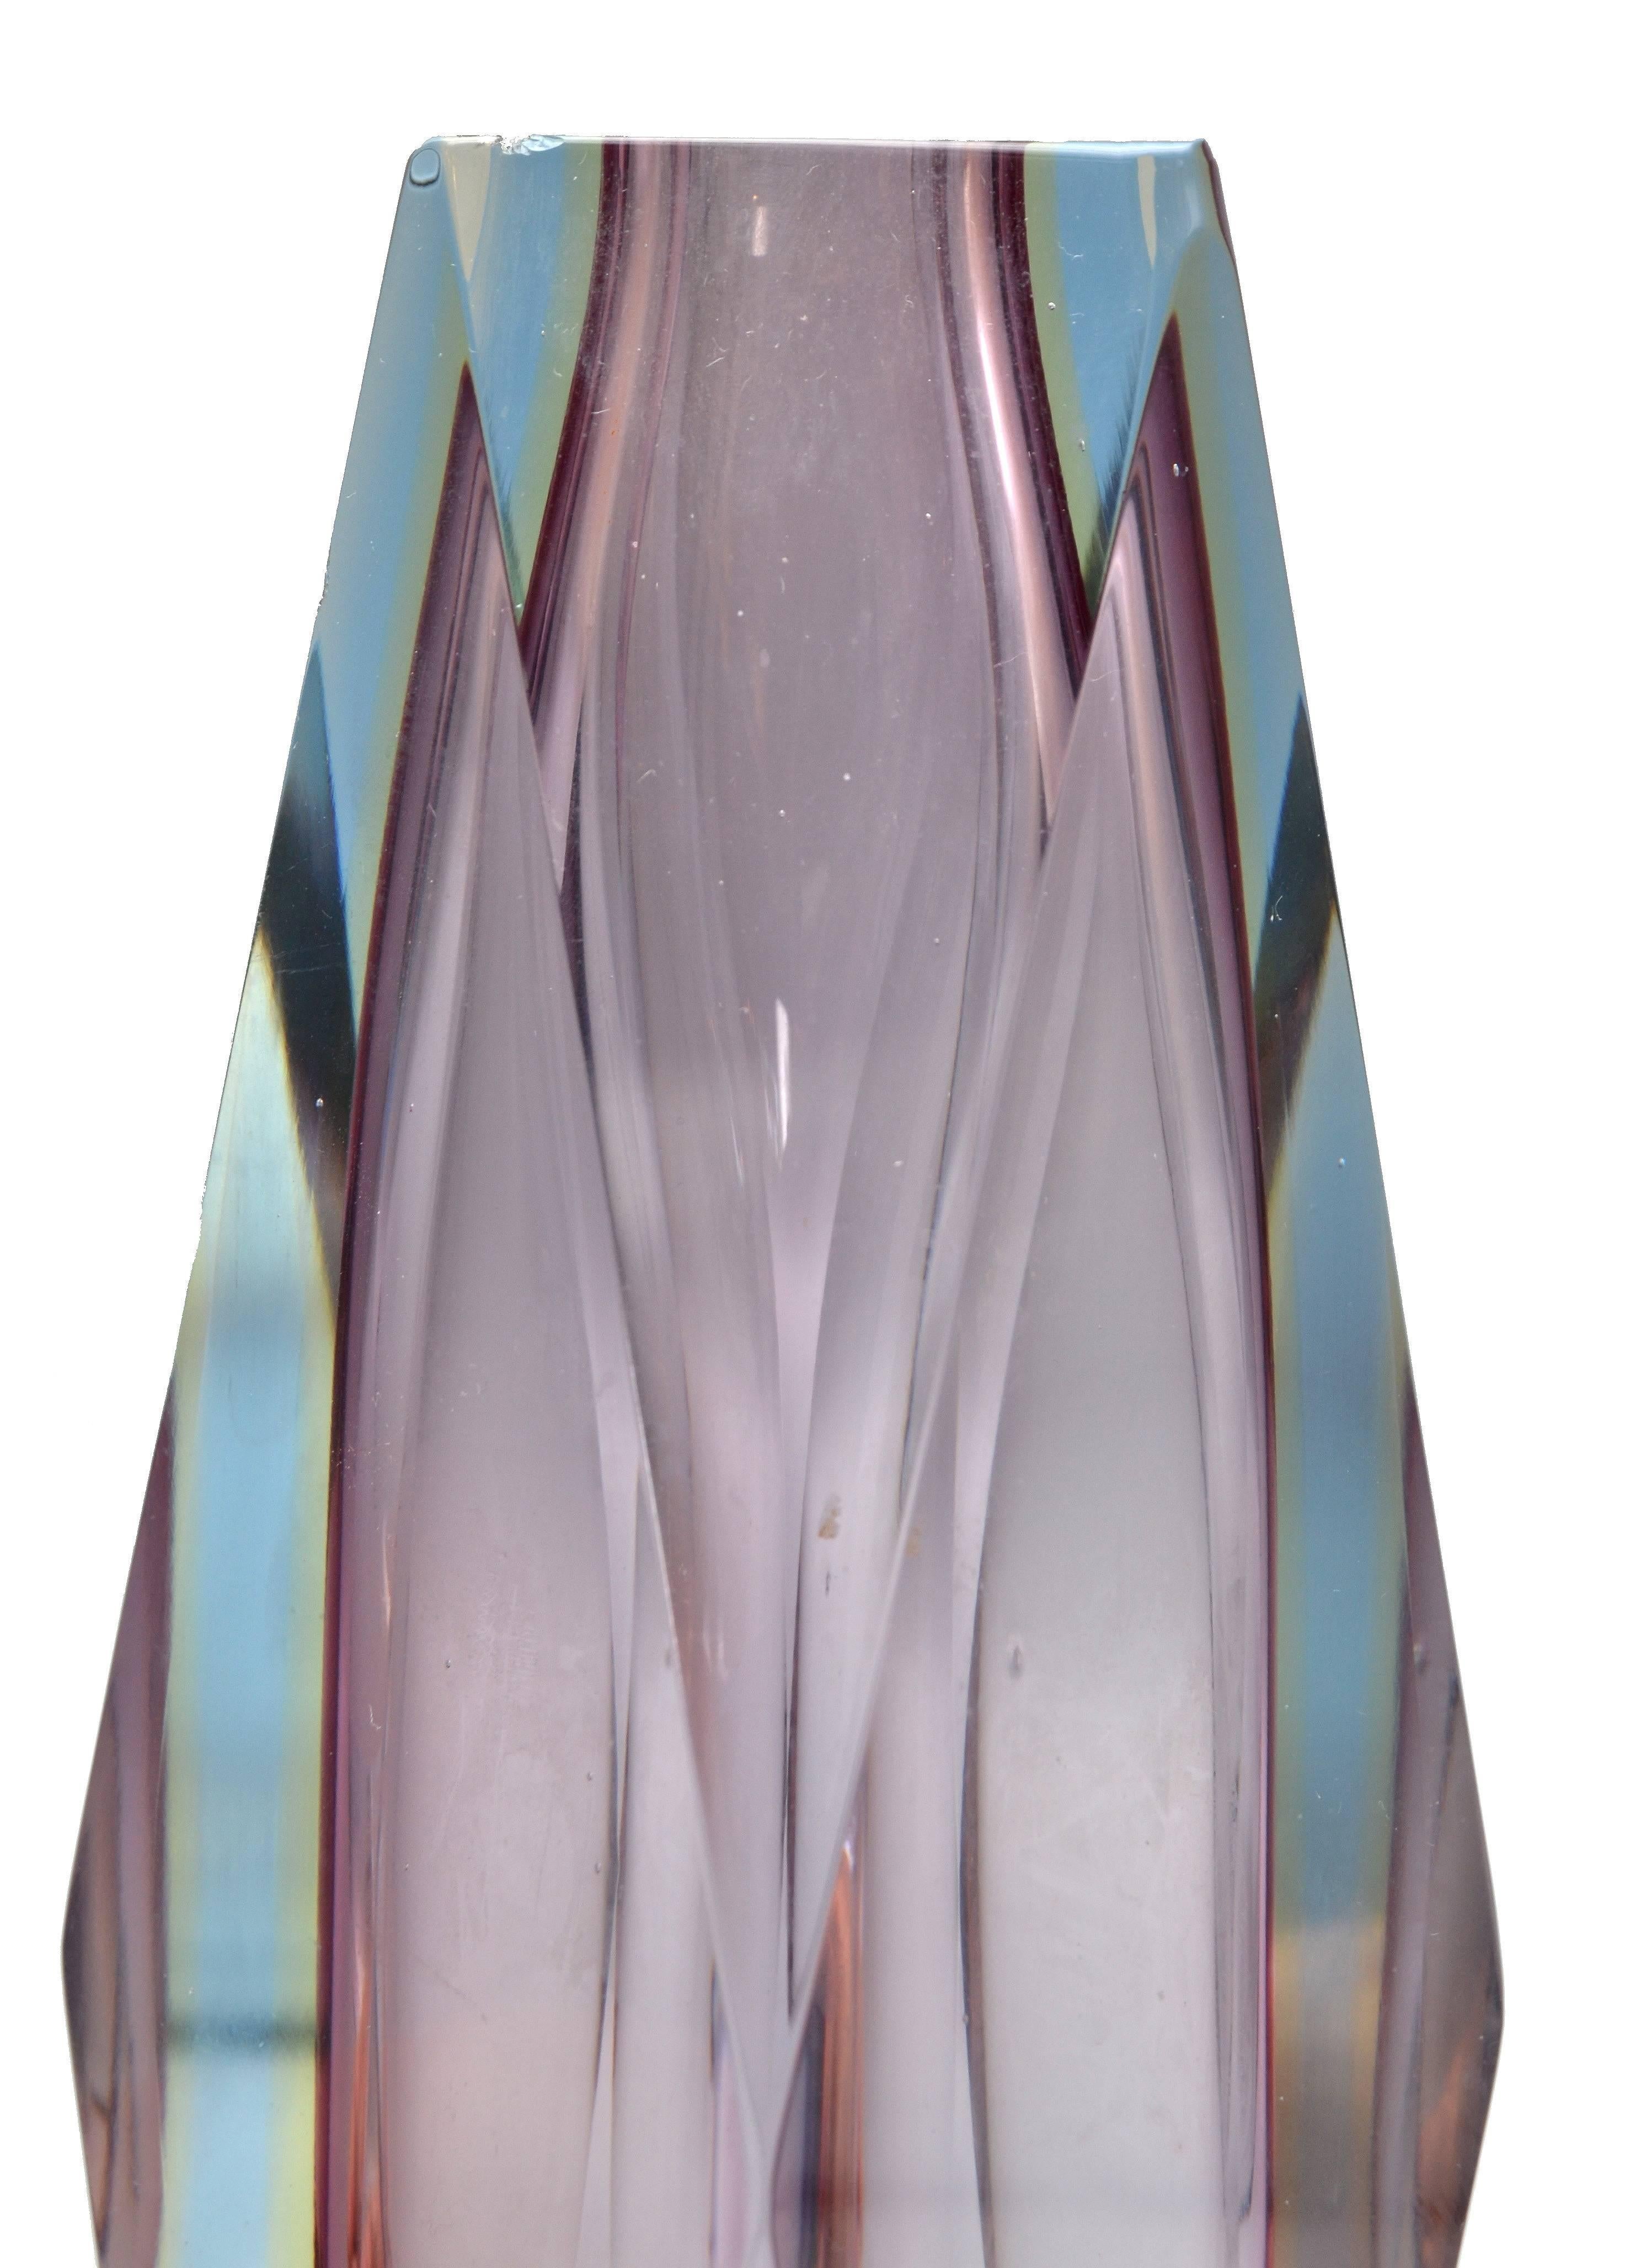 Art Glass Faceted Vase in Violet Attributed to Mandruzzato